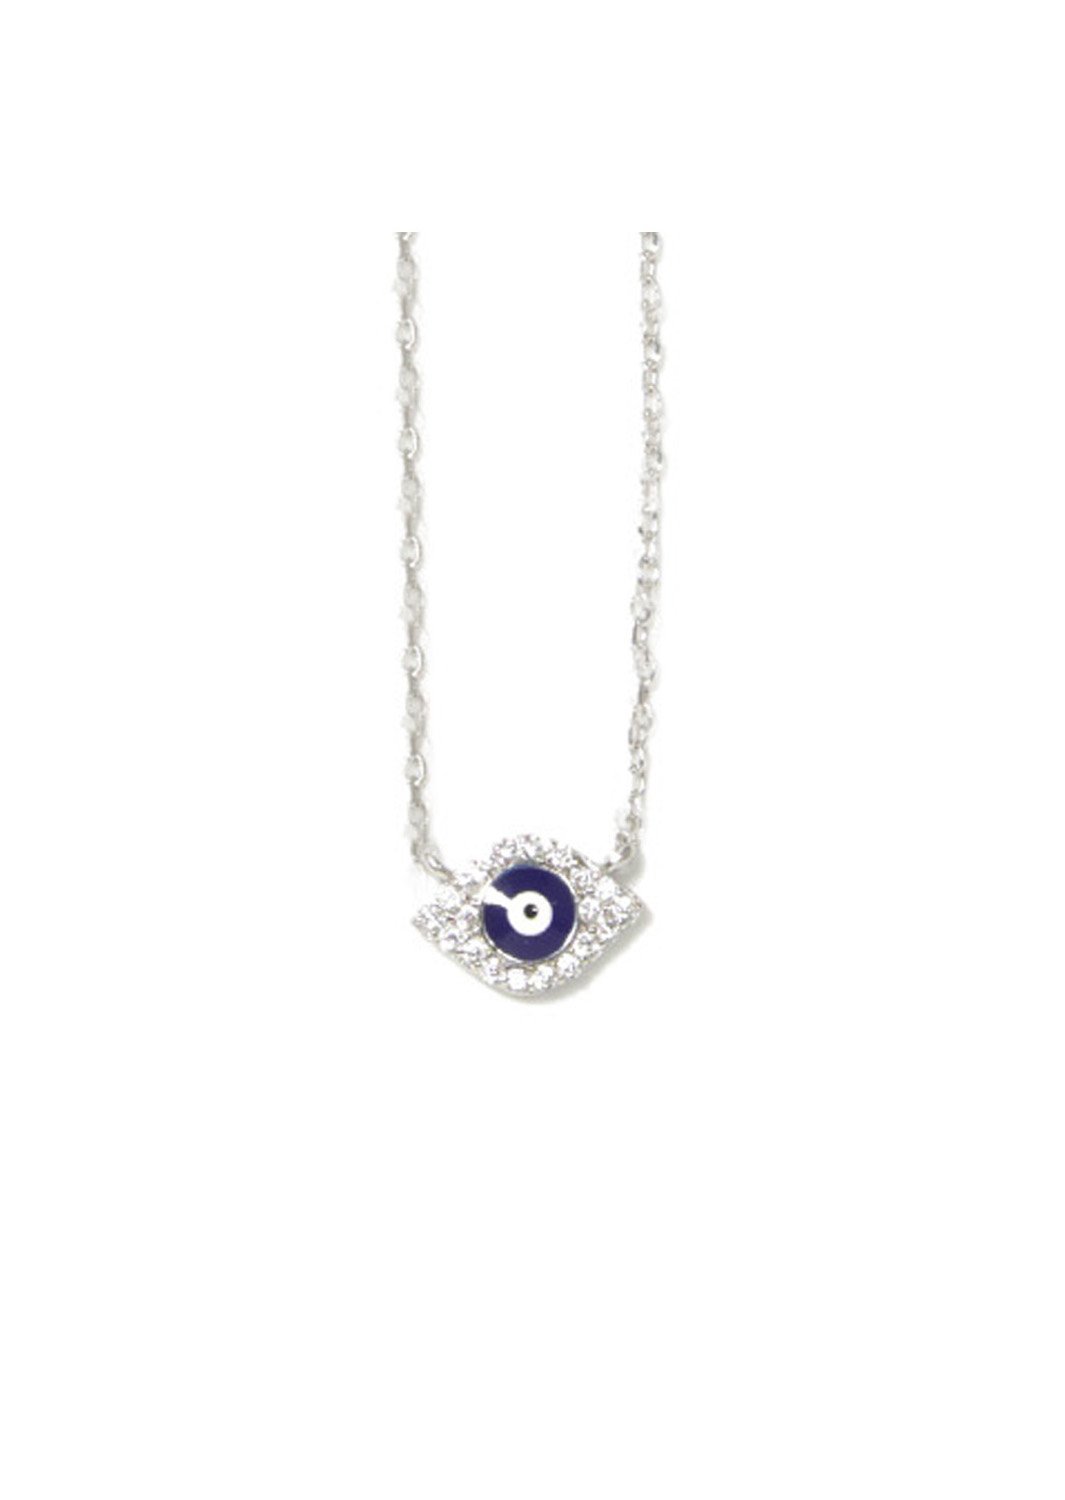 Blue evil eye silver necklace with zircon